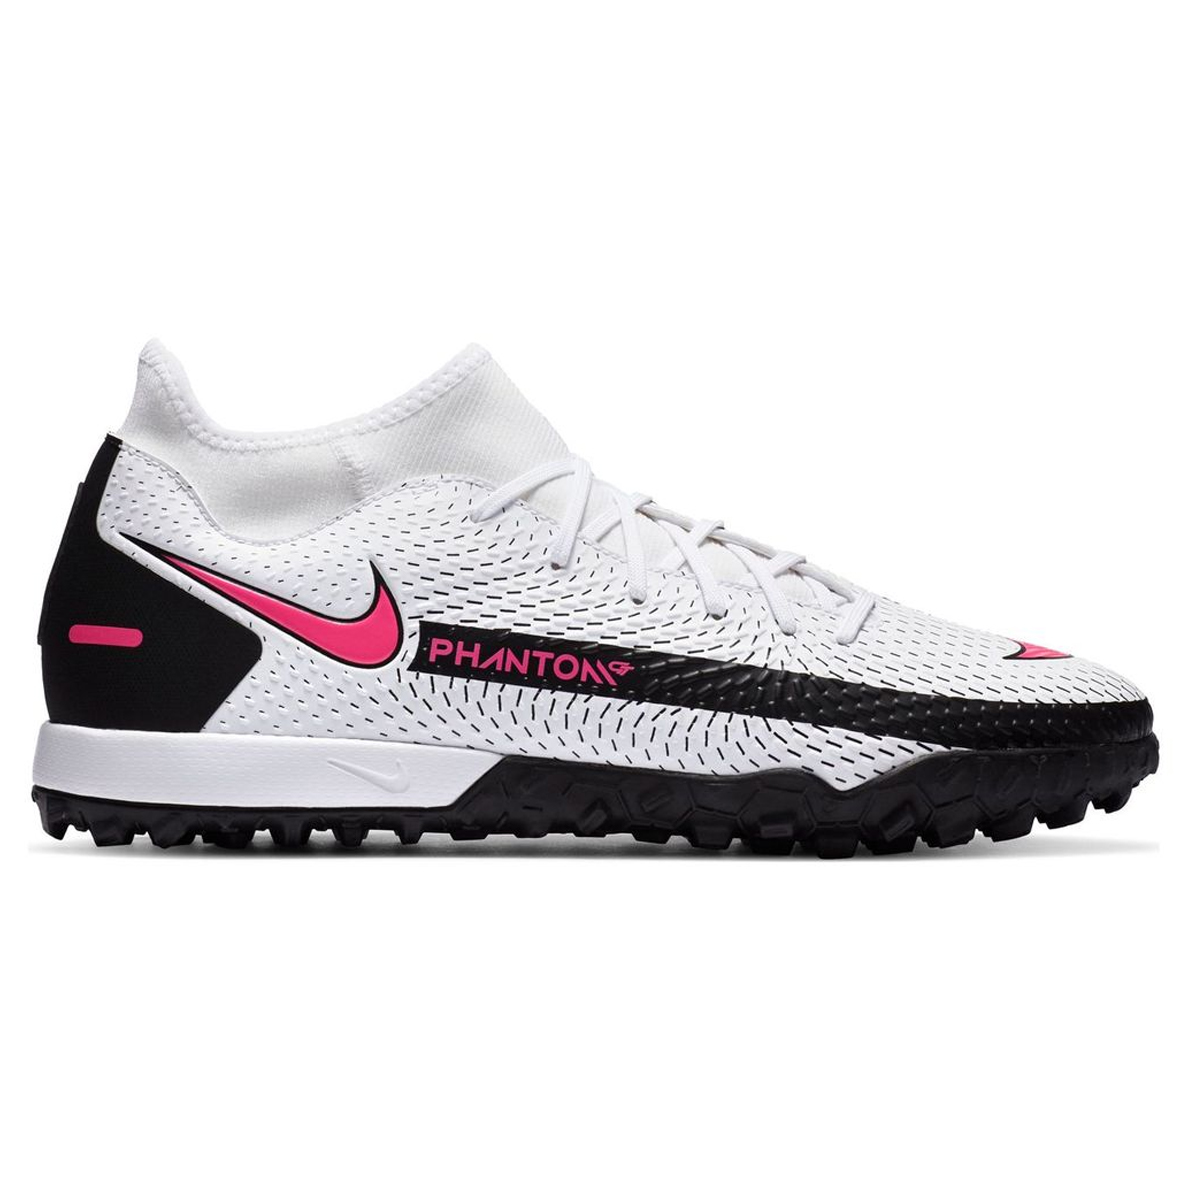 Botines Nike Phantom GT Academy Dynamic Fit TF,  image number null